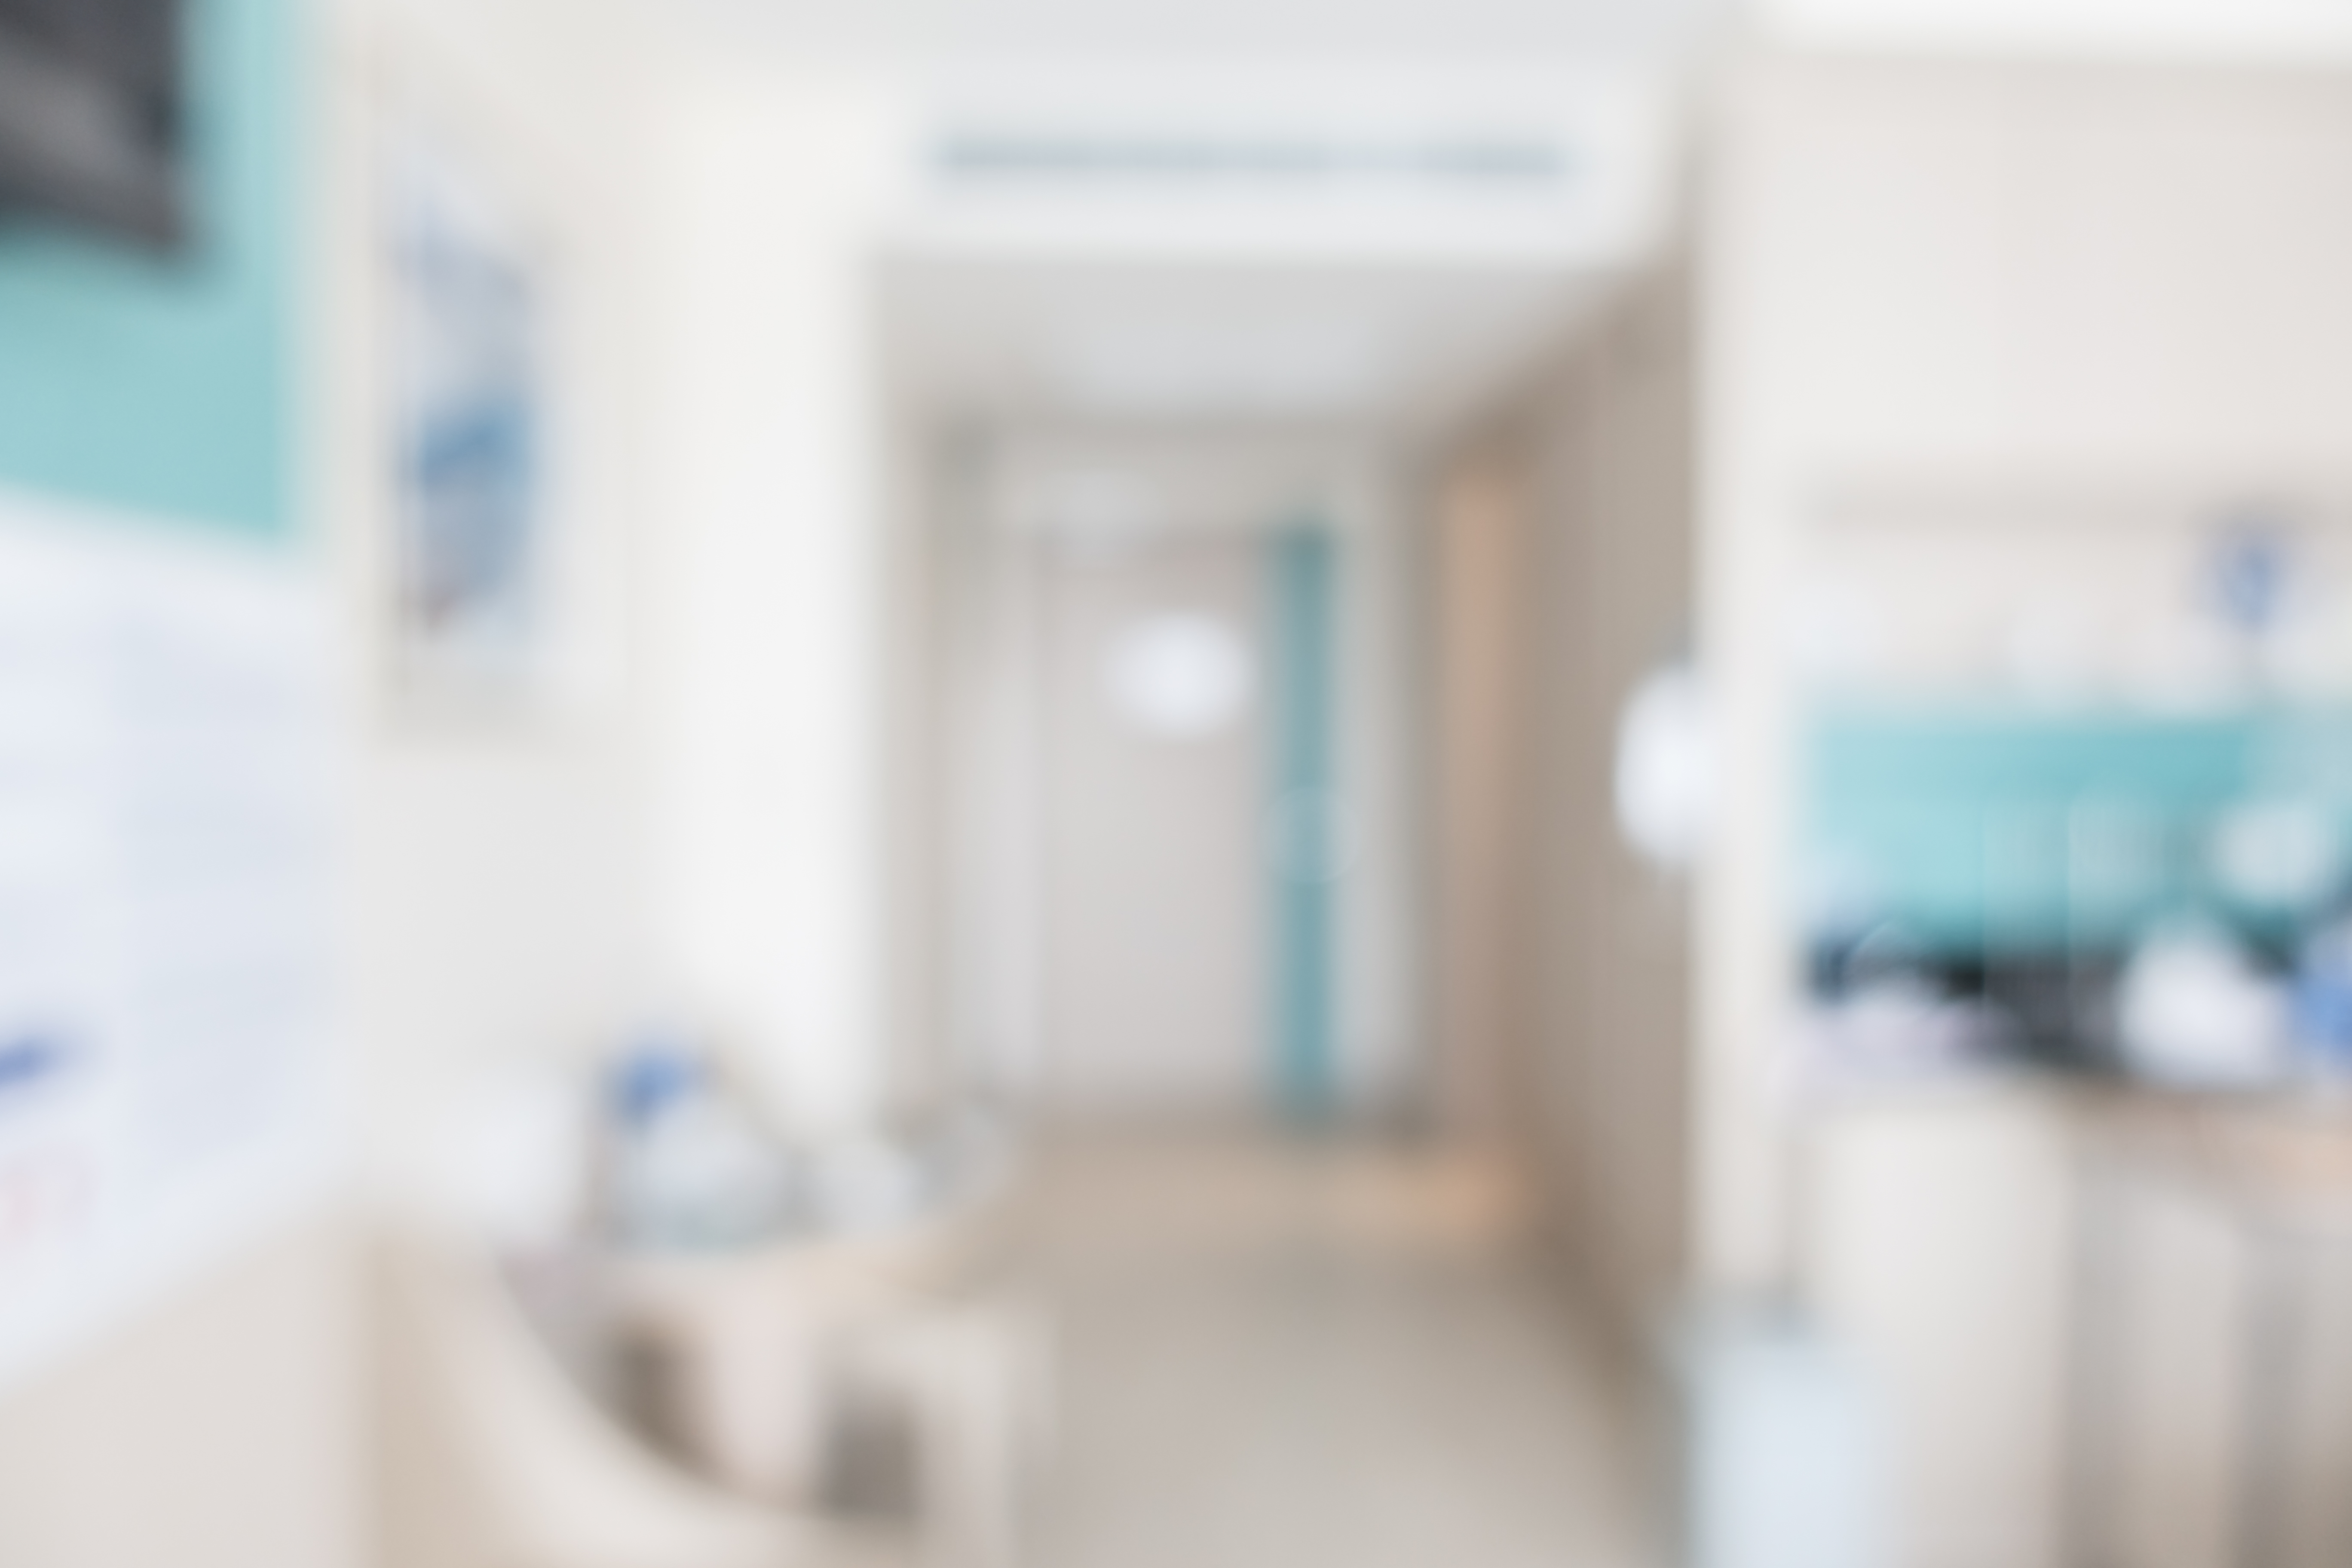 Abstract blur hospital room | Fuente: Shutterstock